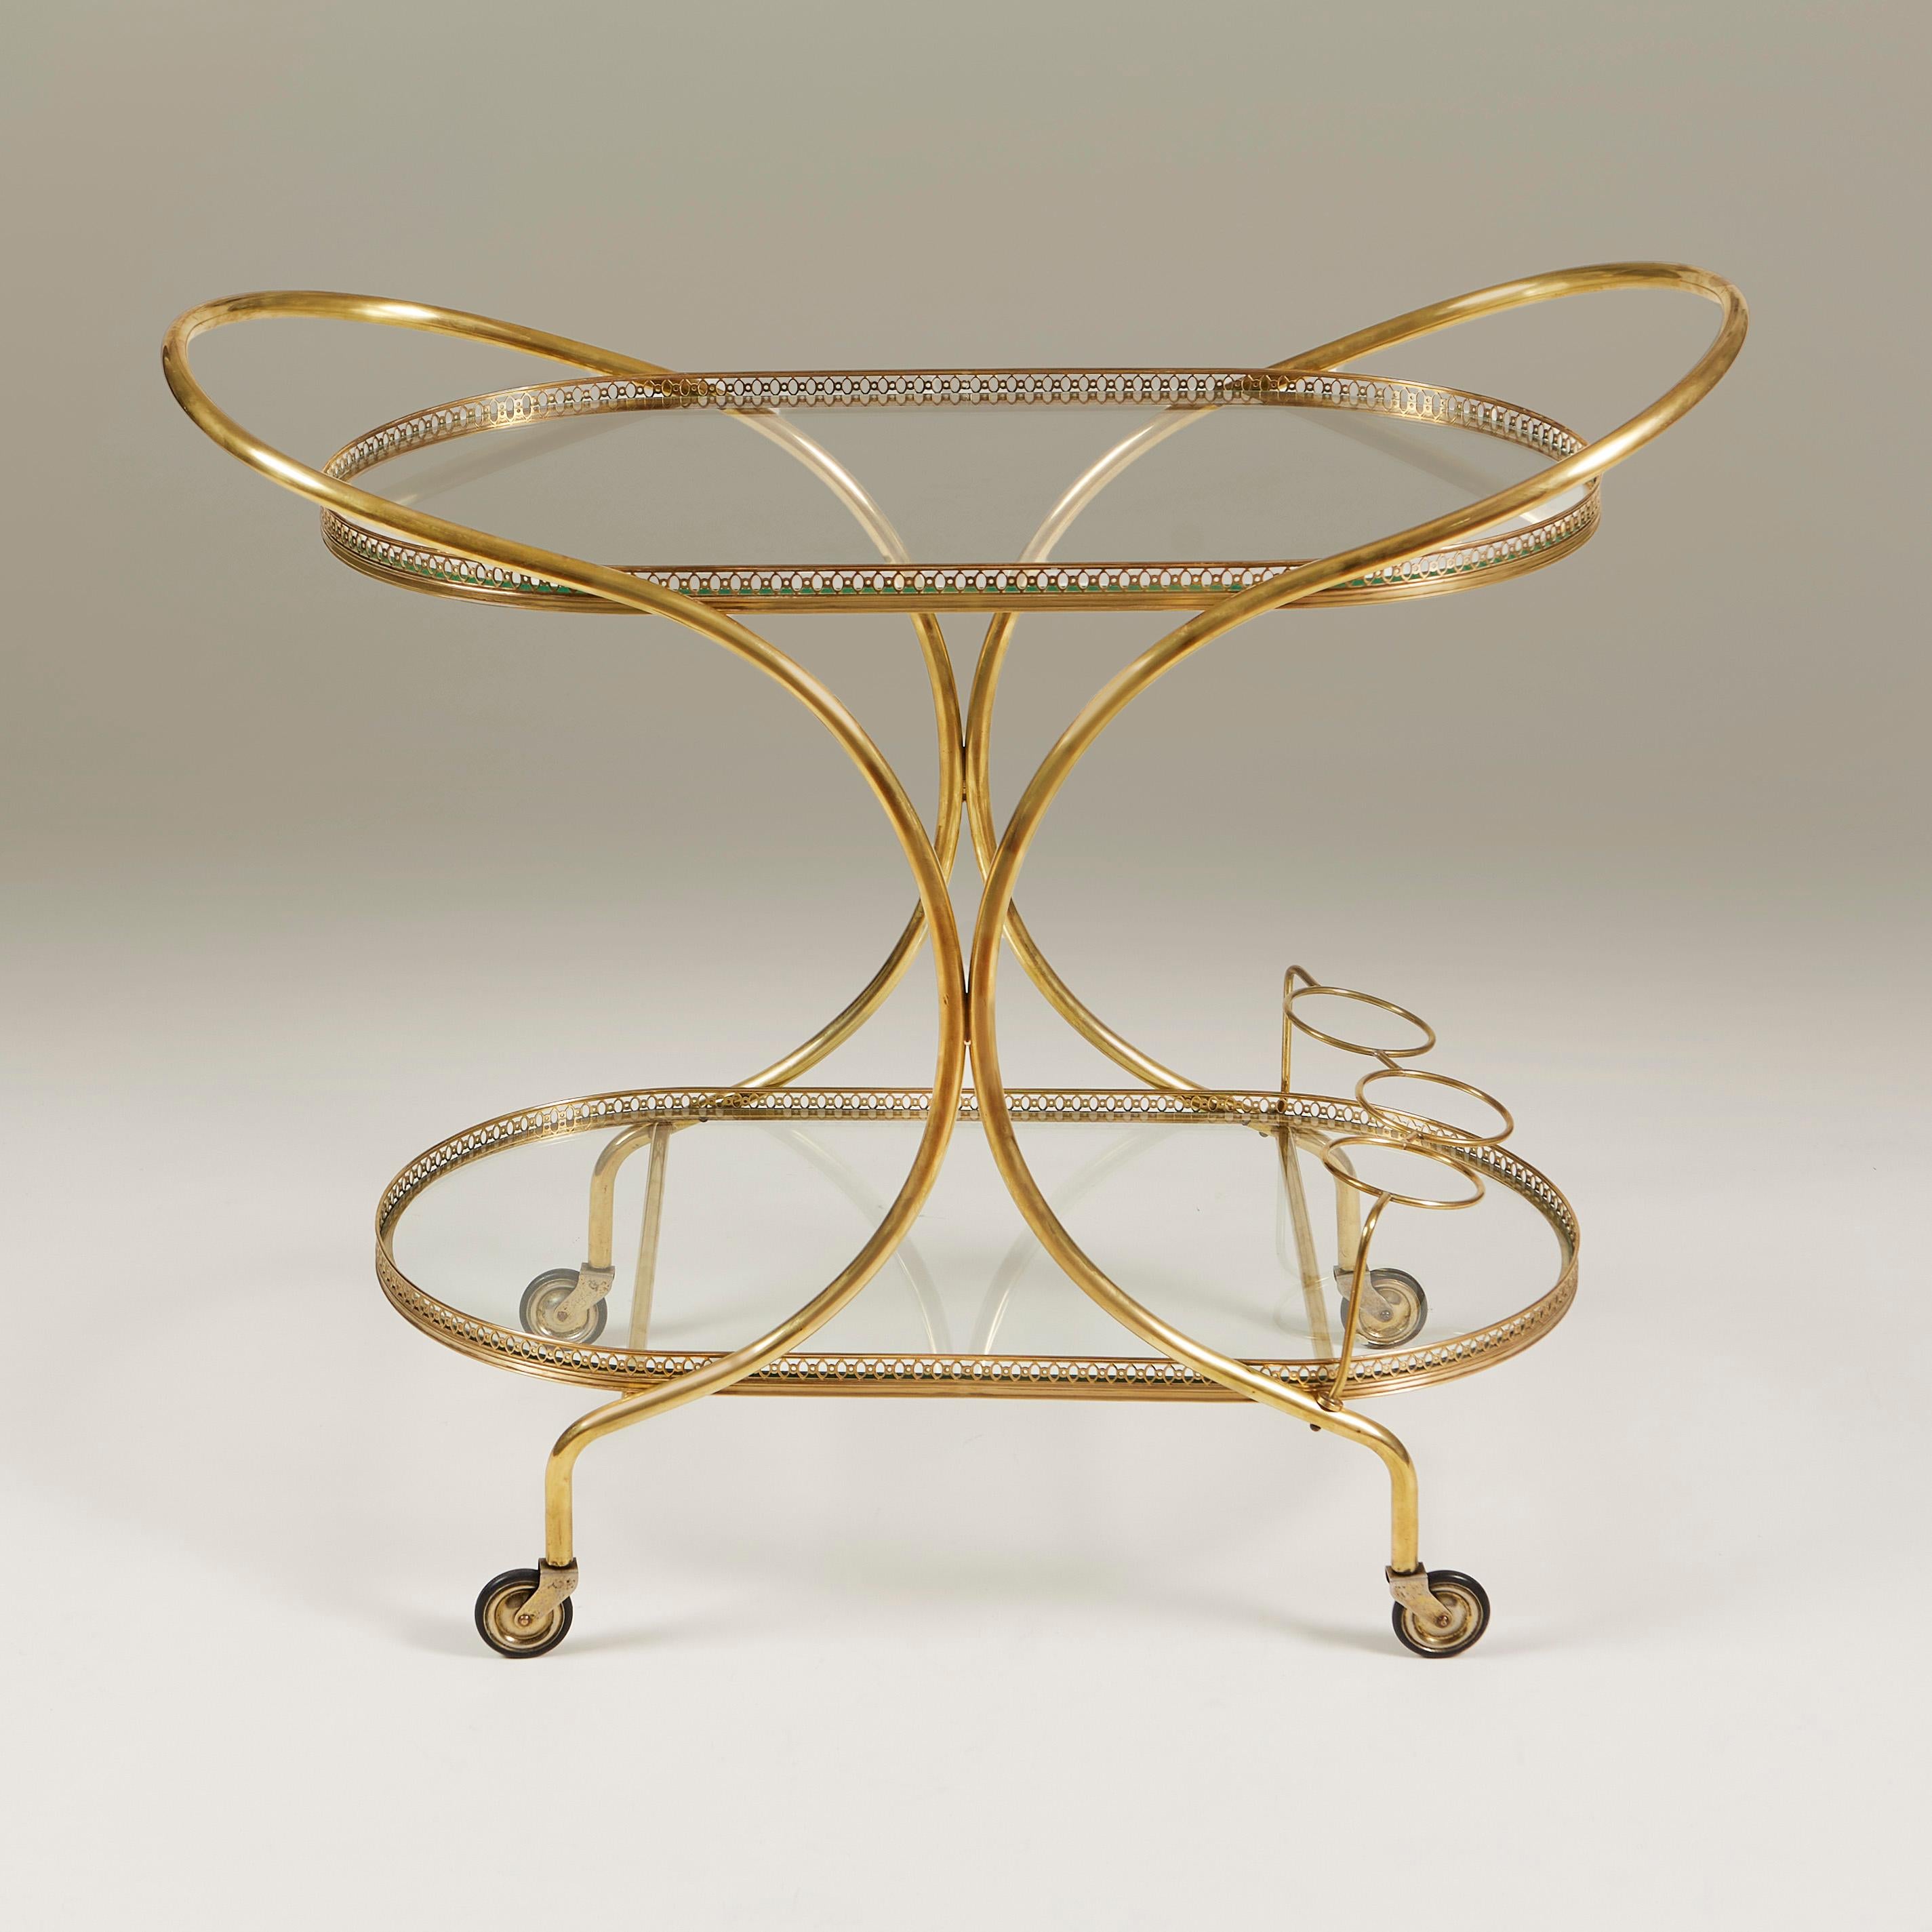 Elegant two-tier oval drinks trolley with simple curved brass frame that extends to create a handle either end. Decorative filigree brass edge to both shelves. Simple brass bottle holder for 3 bottles. Sits on castor wheels for ease of movement.
